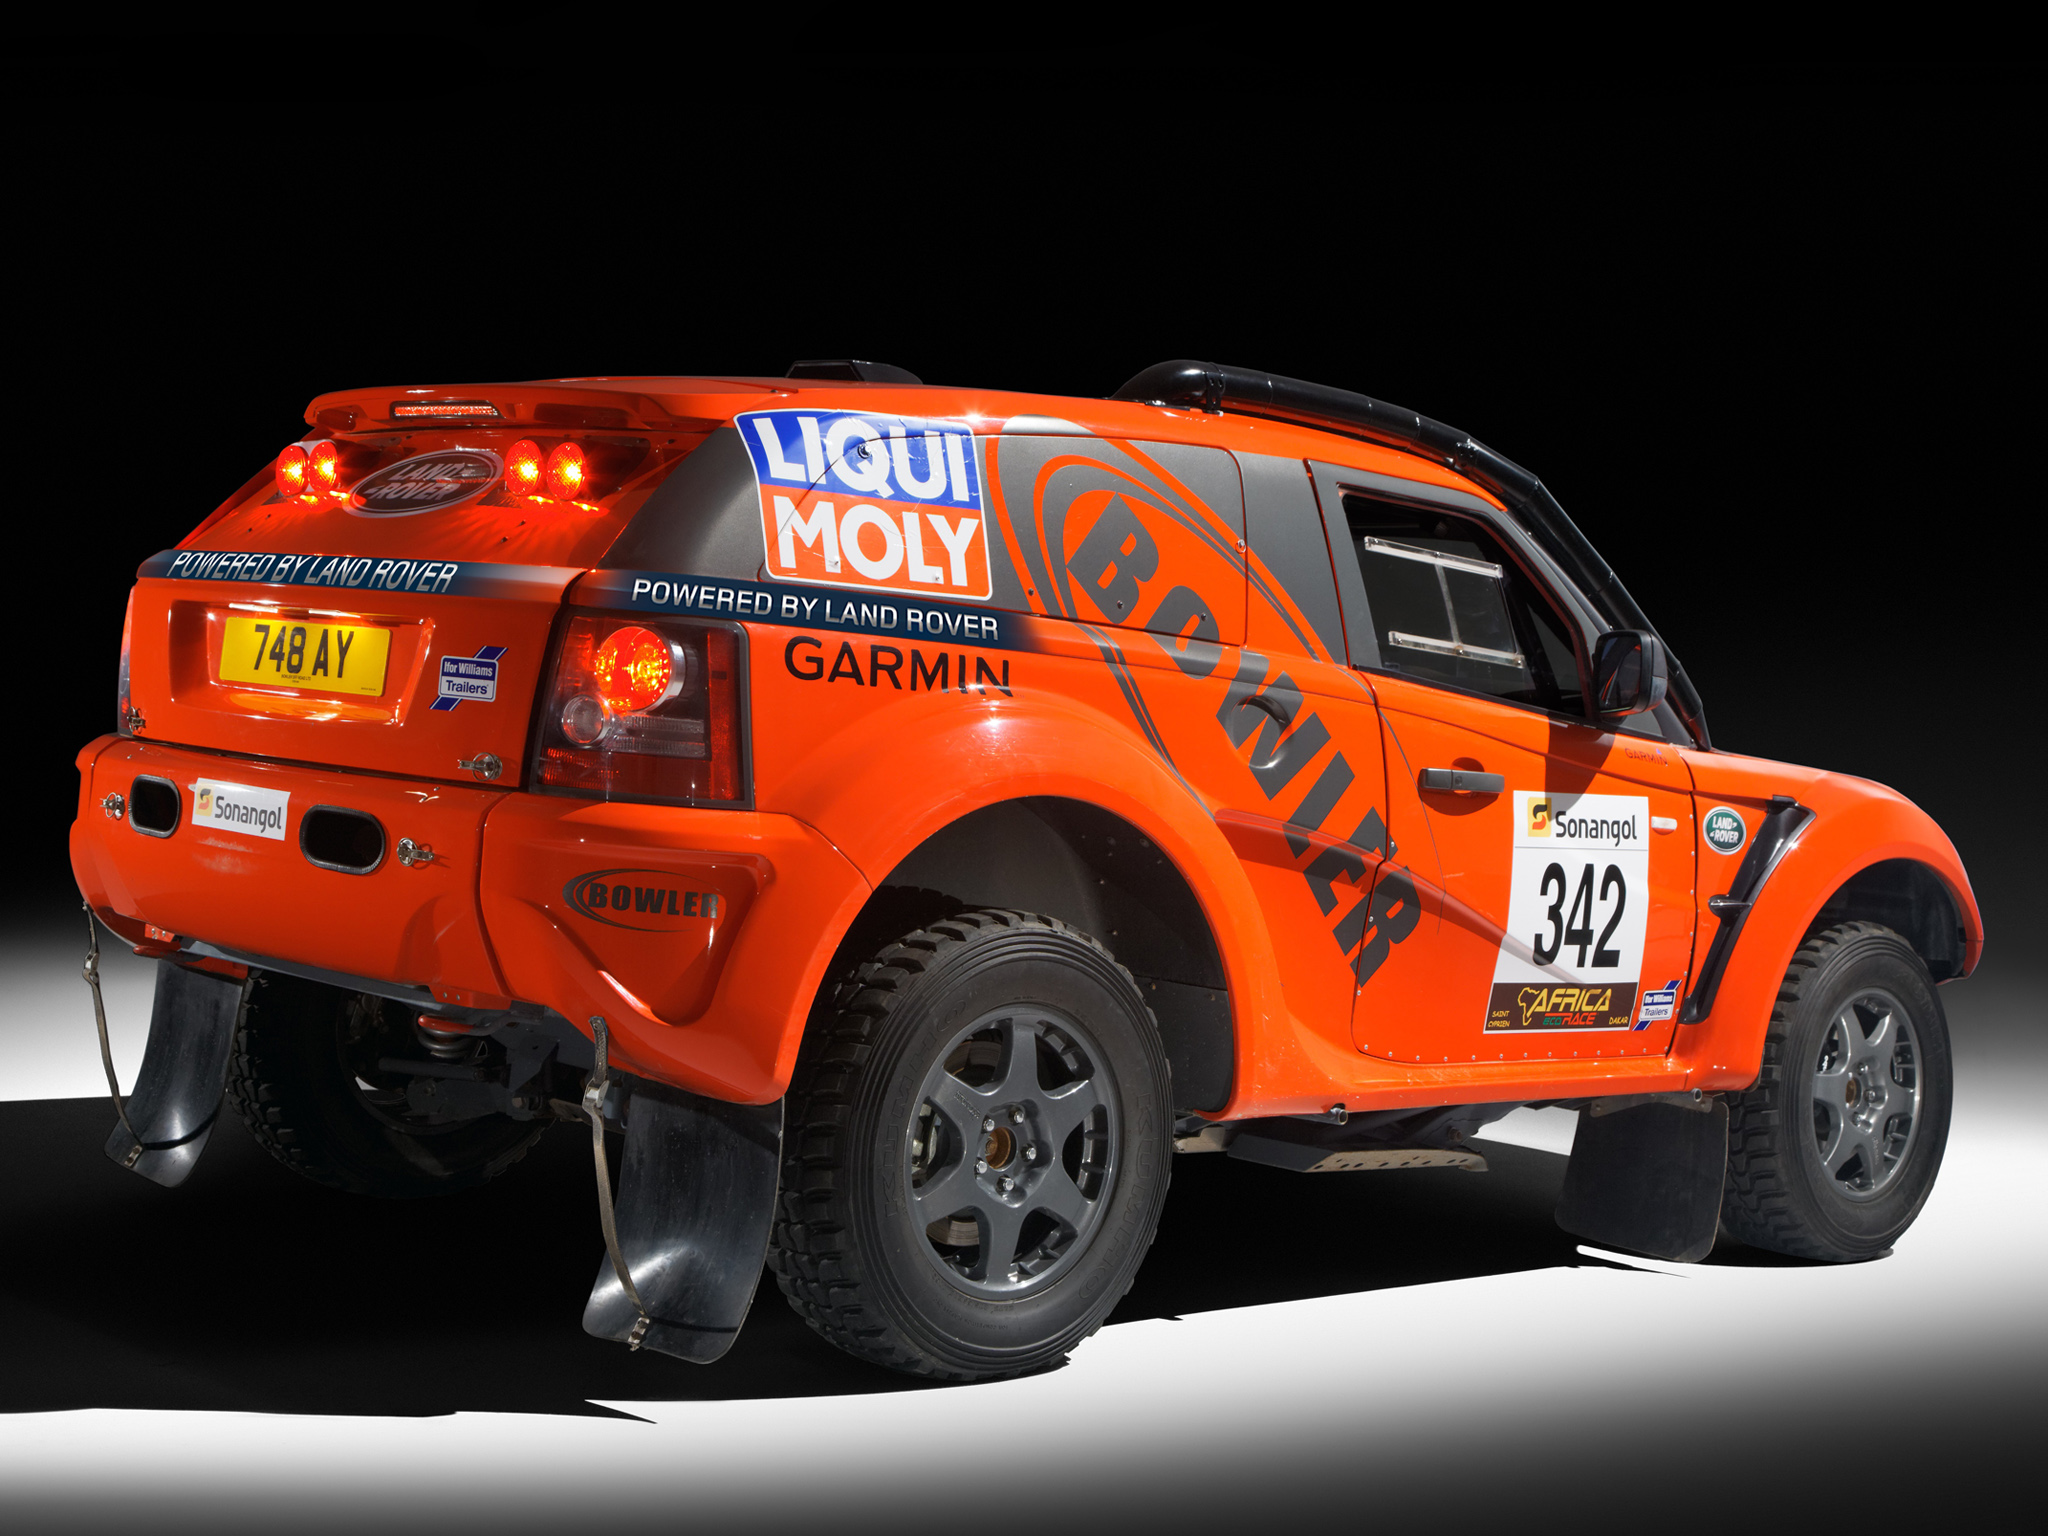 2011, Landrover, Bowler, Exr, Rally, Suv, Truck, Race, Racing, Offroad, Awd Wallpaper